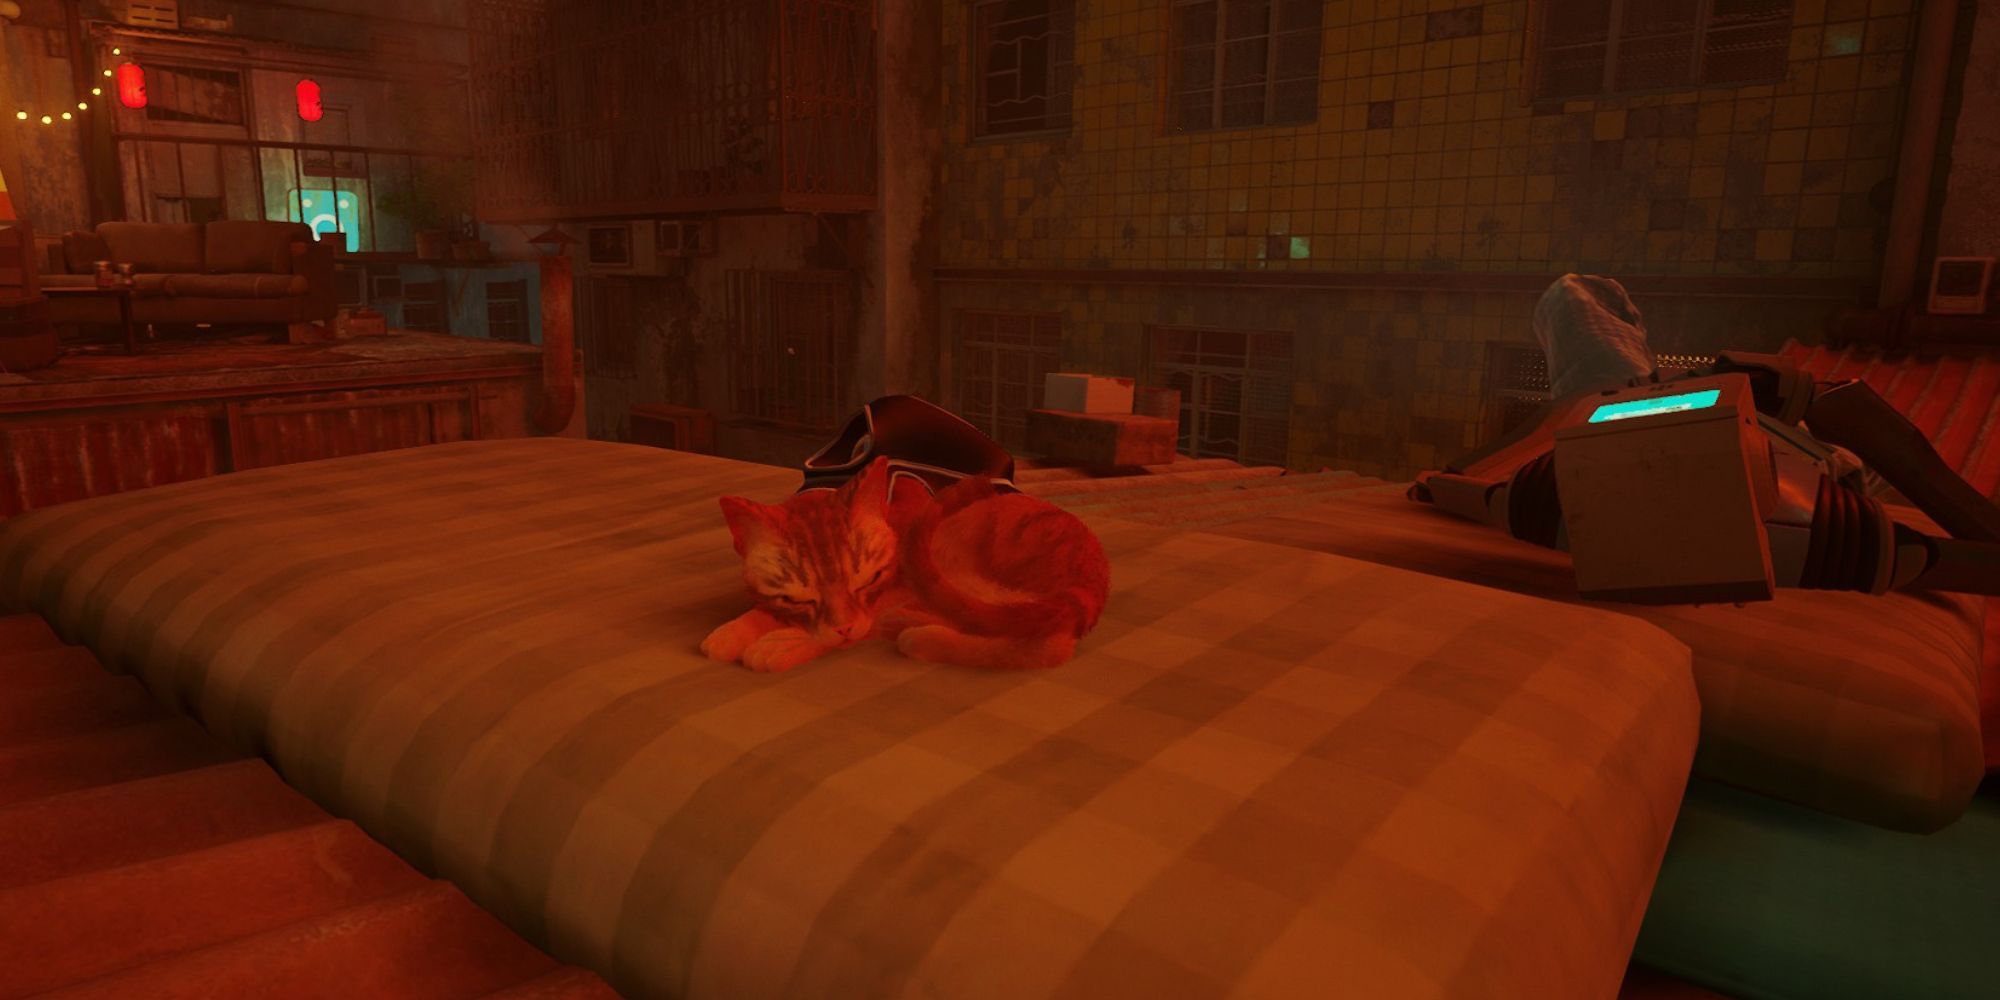 the cat from Stray lies on a mattress topper